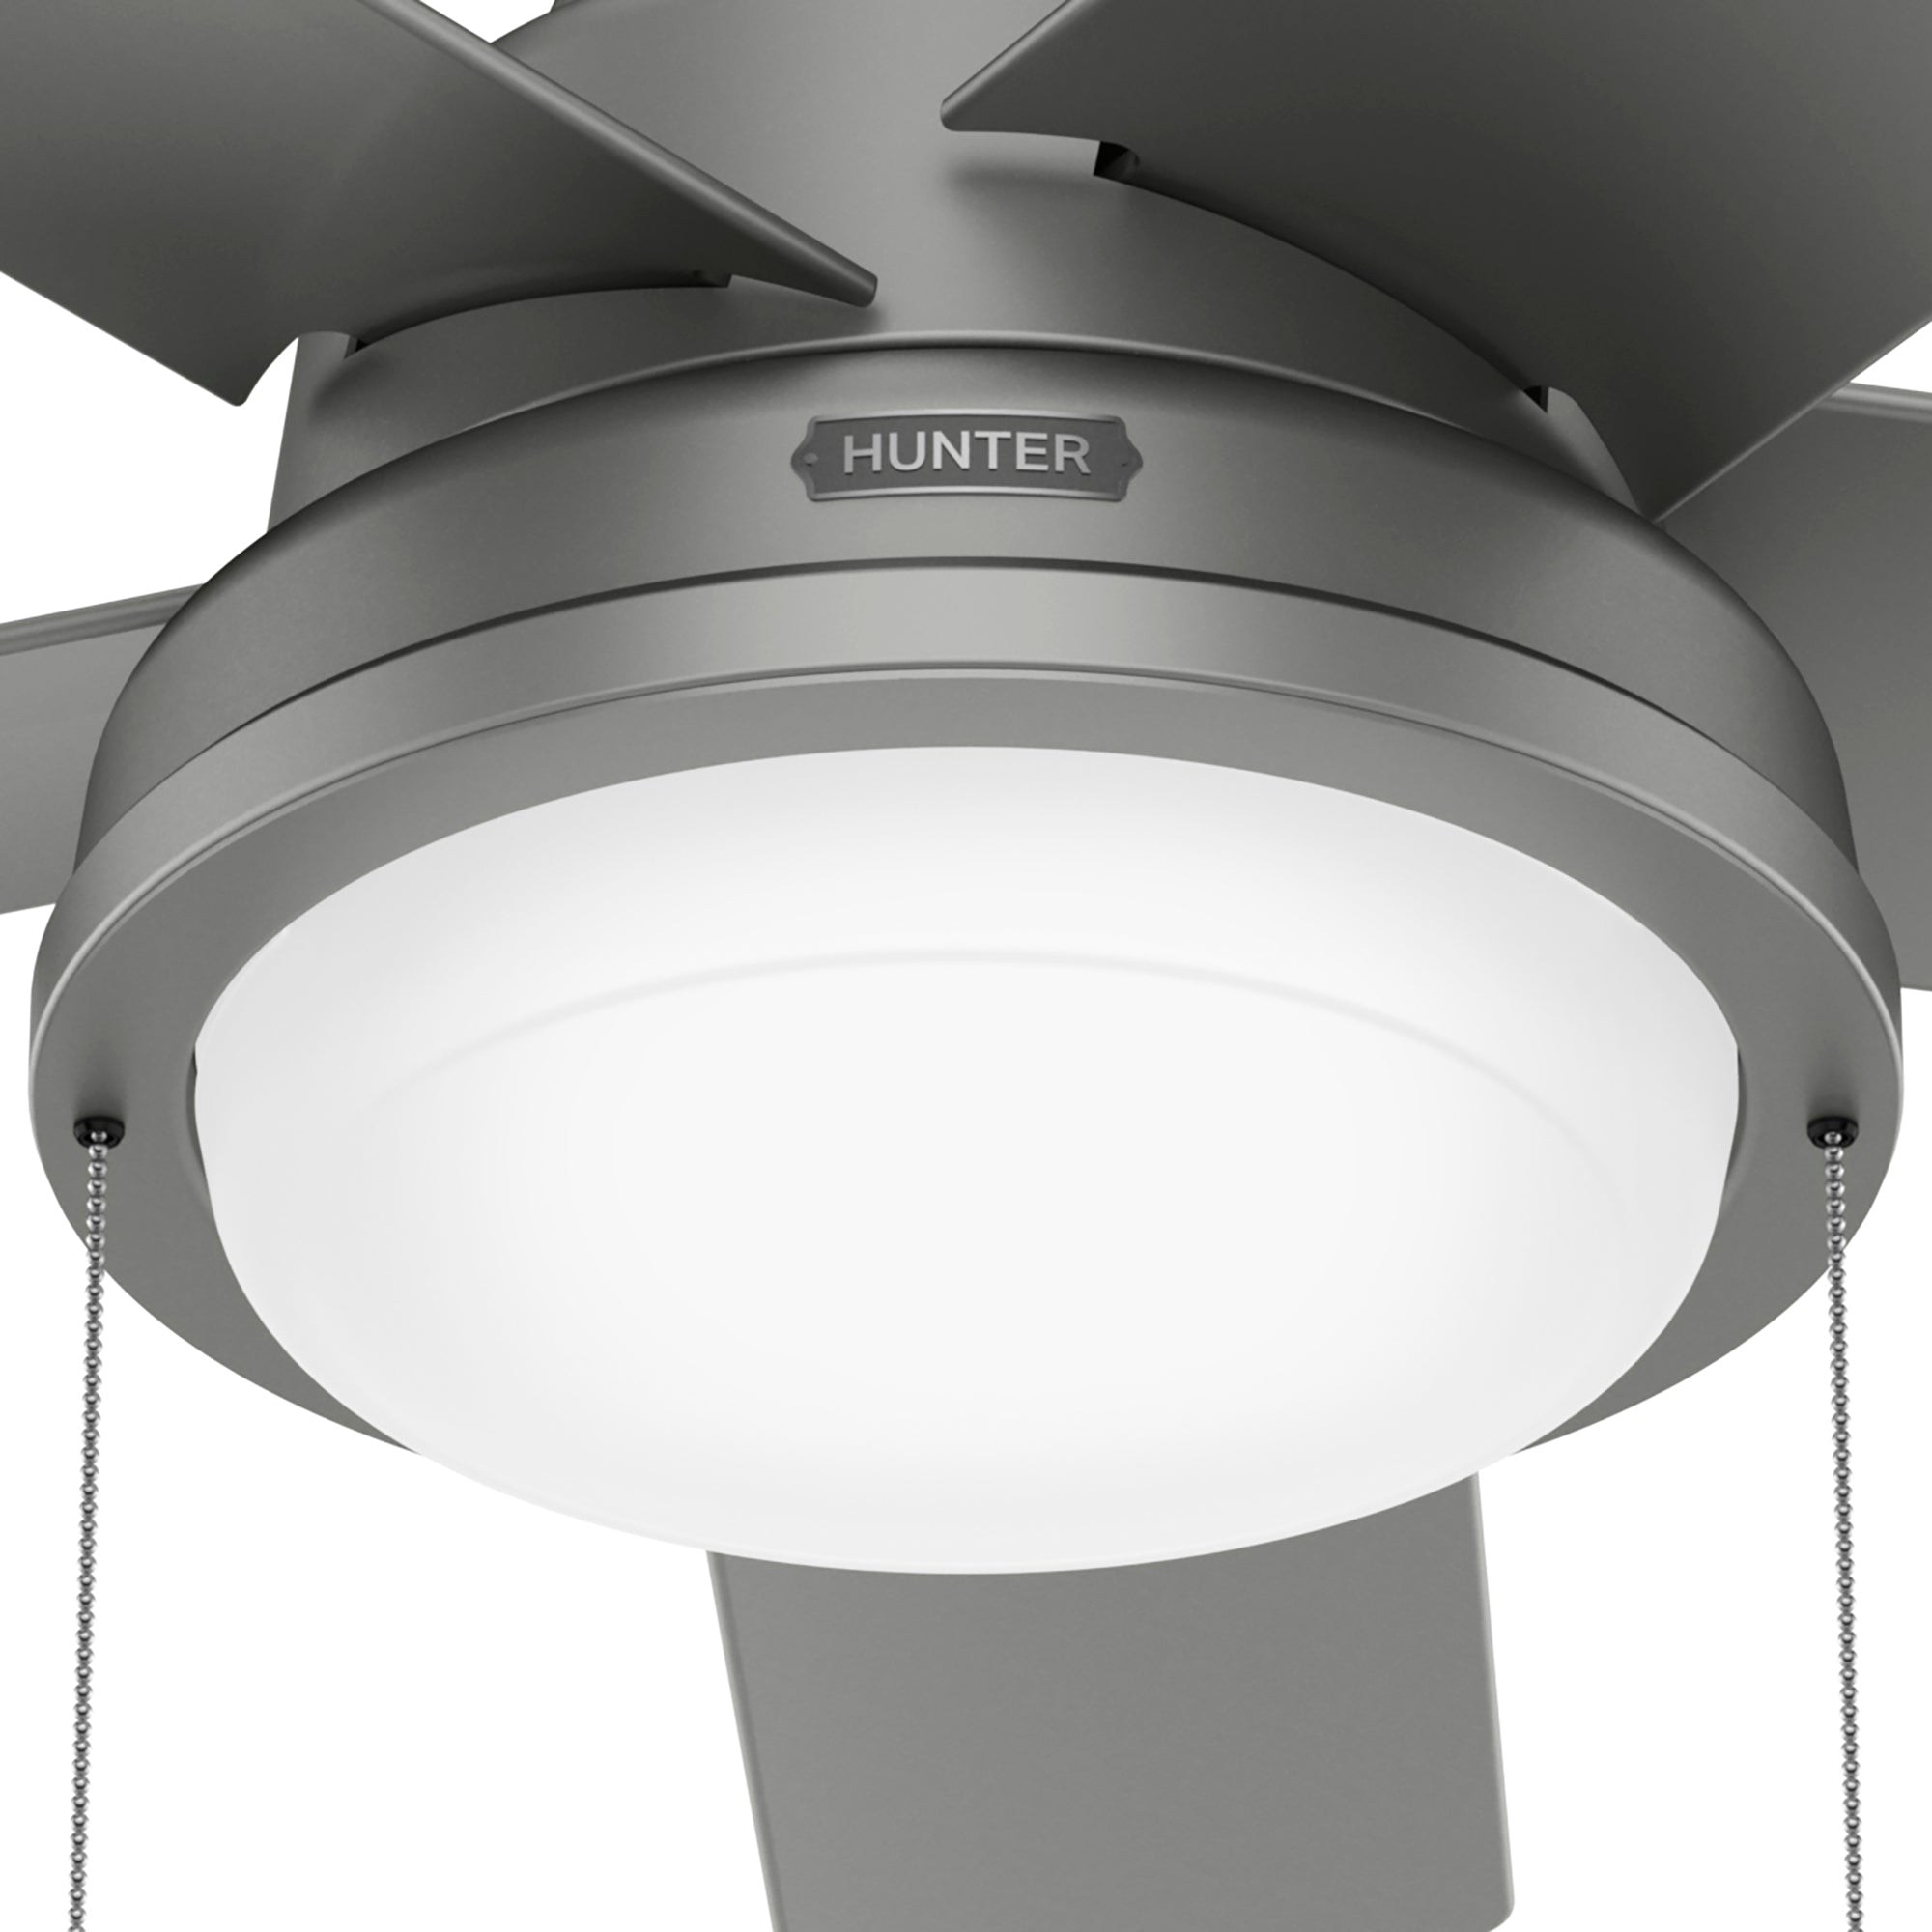 Hunter 44 inch Seawall Indoor / Outdoor Ceiling Fan with LED Light Kit and Pull Chain Ceiling Fan Hunter Matte Silver Matte Silver / Matte Silver Painted Cased White